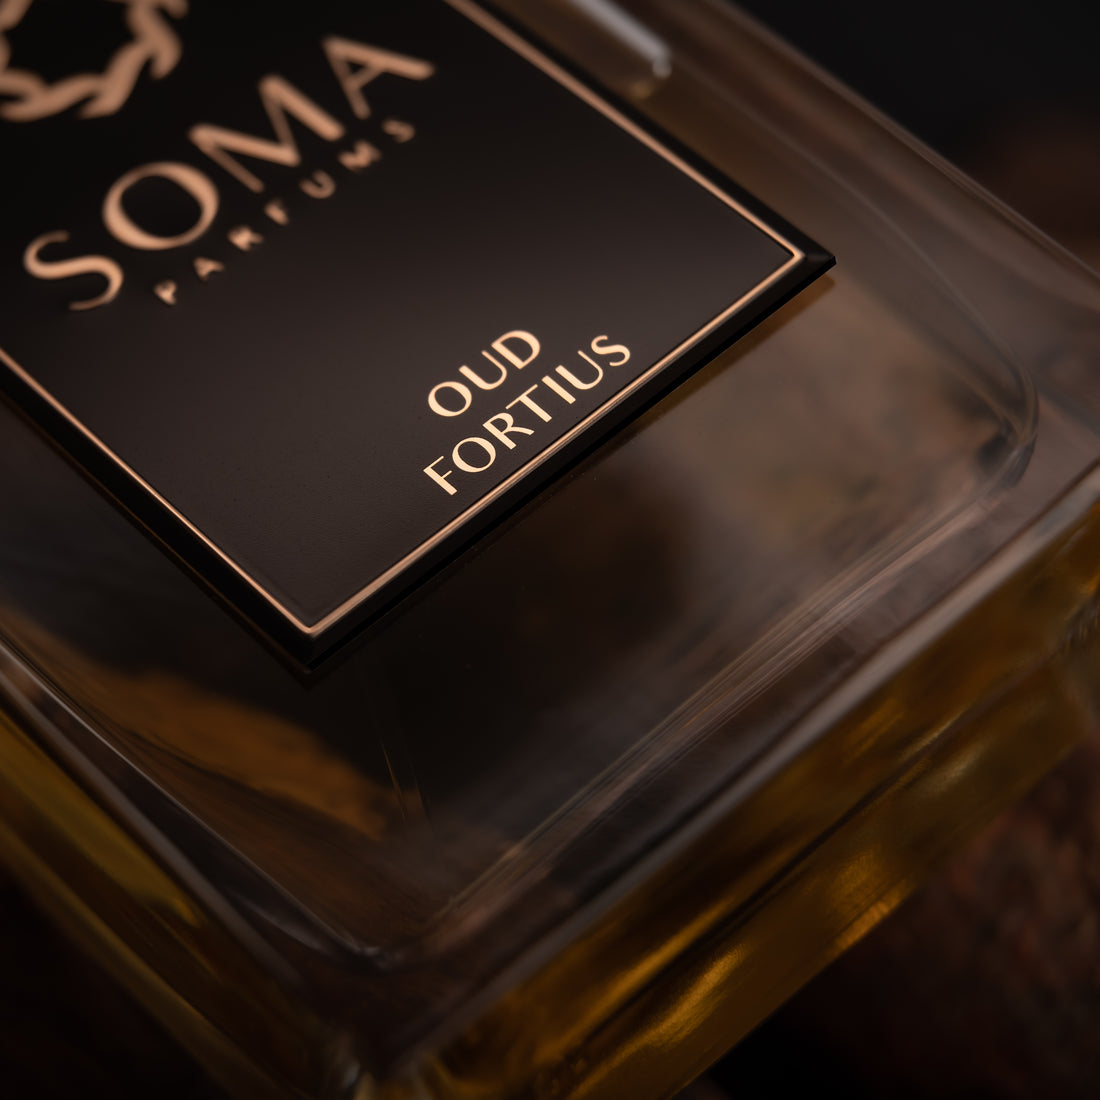 Introducing La Collection de Parfums à base d'Oud - Our Fragrance Collection Made with Genuine Oud